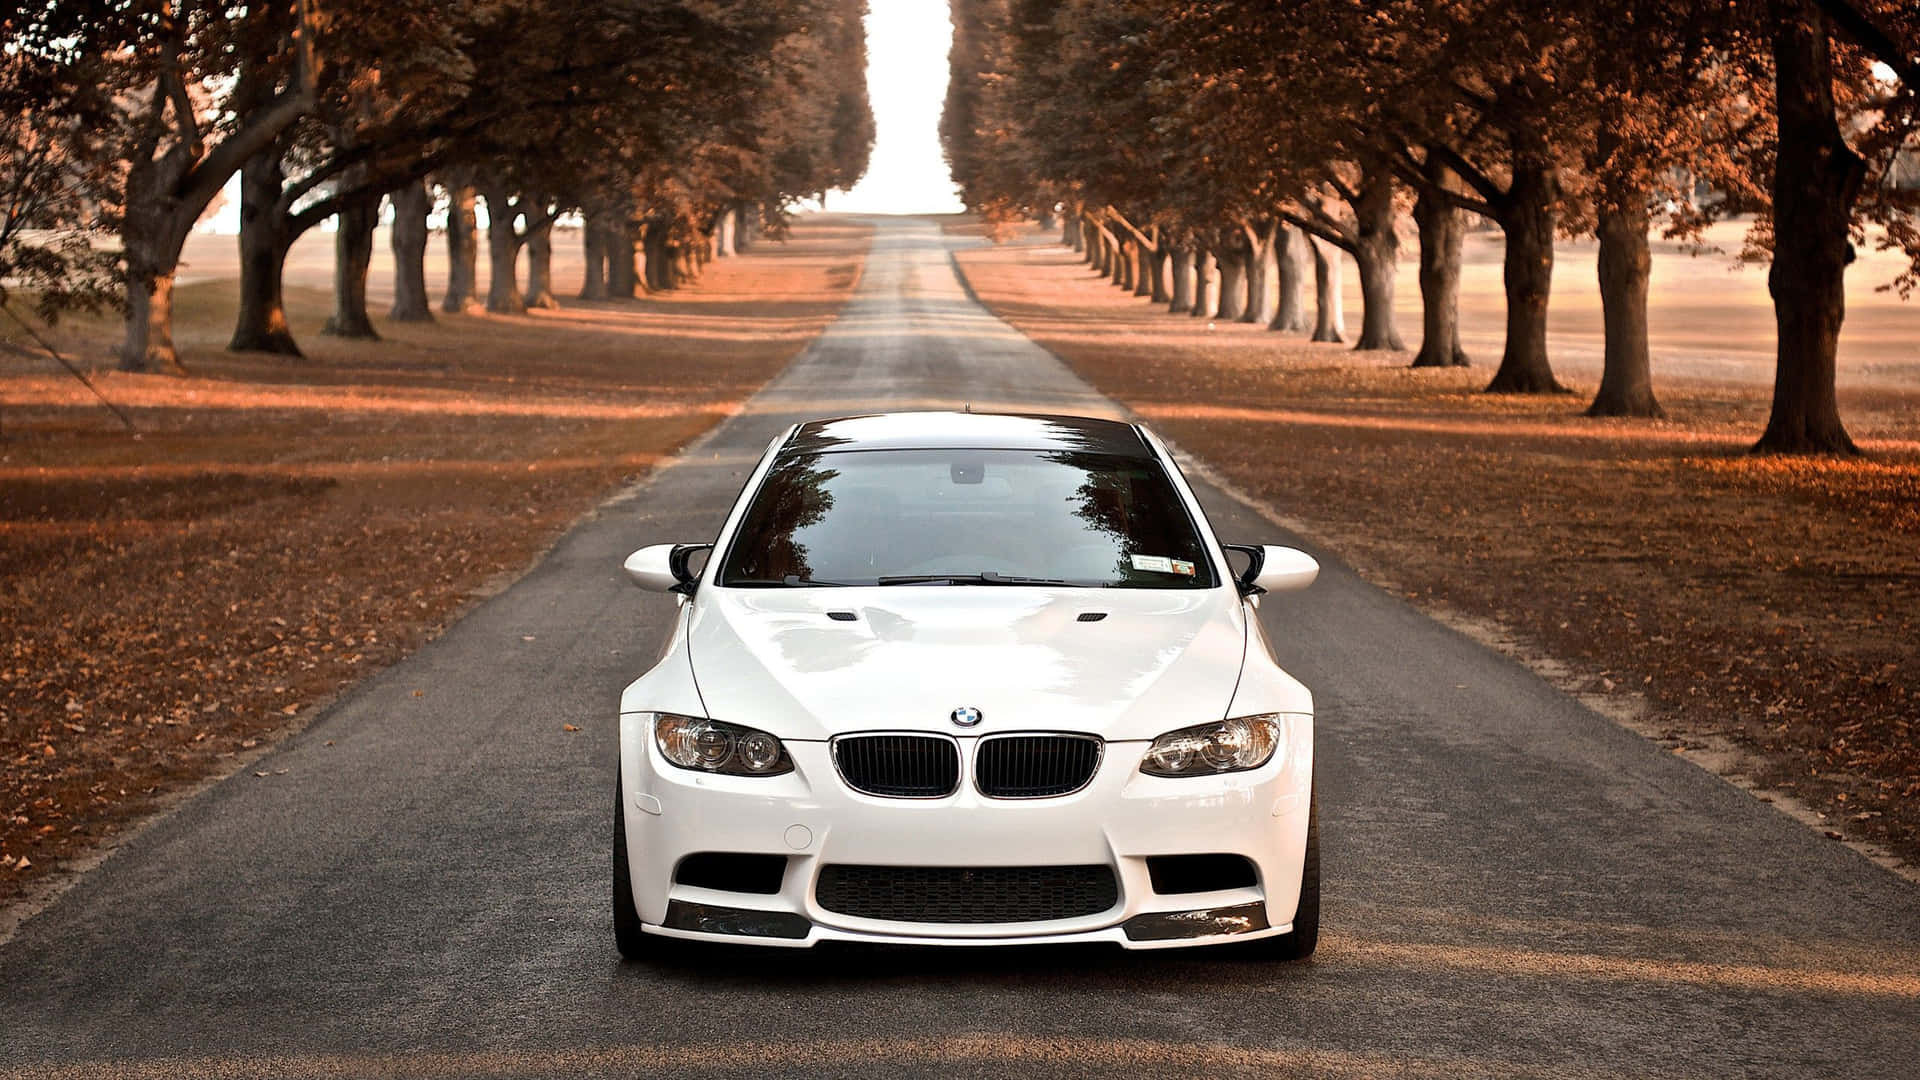 White BMW Car On The Road Wallpaper